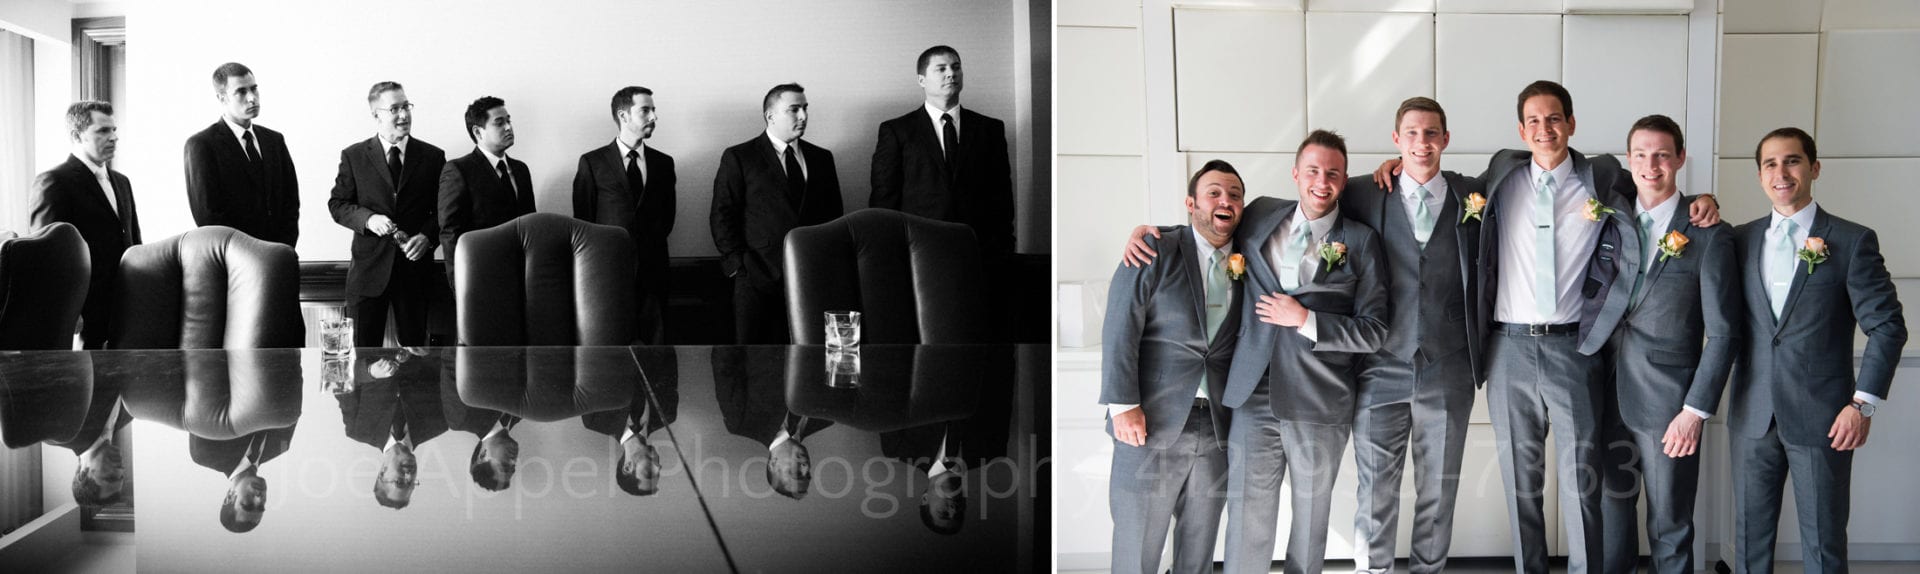 groomsmen in suits wait in a meeting room and pose outdoors